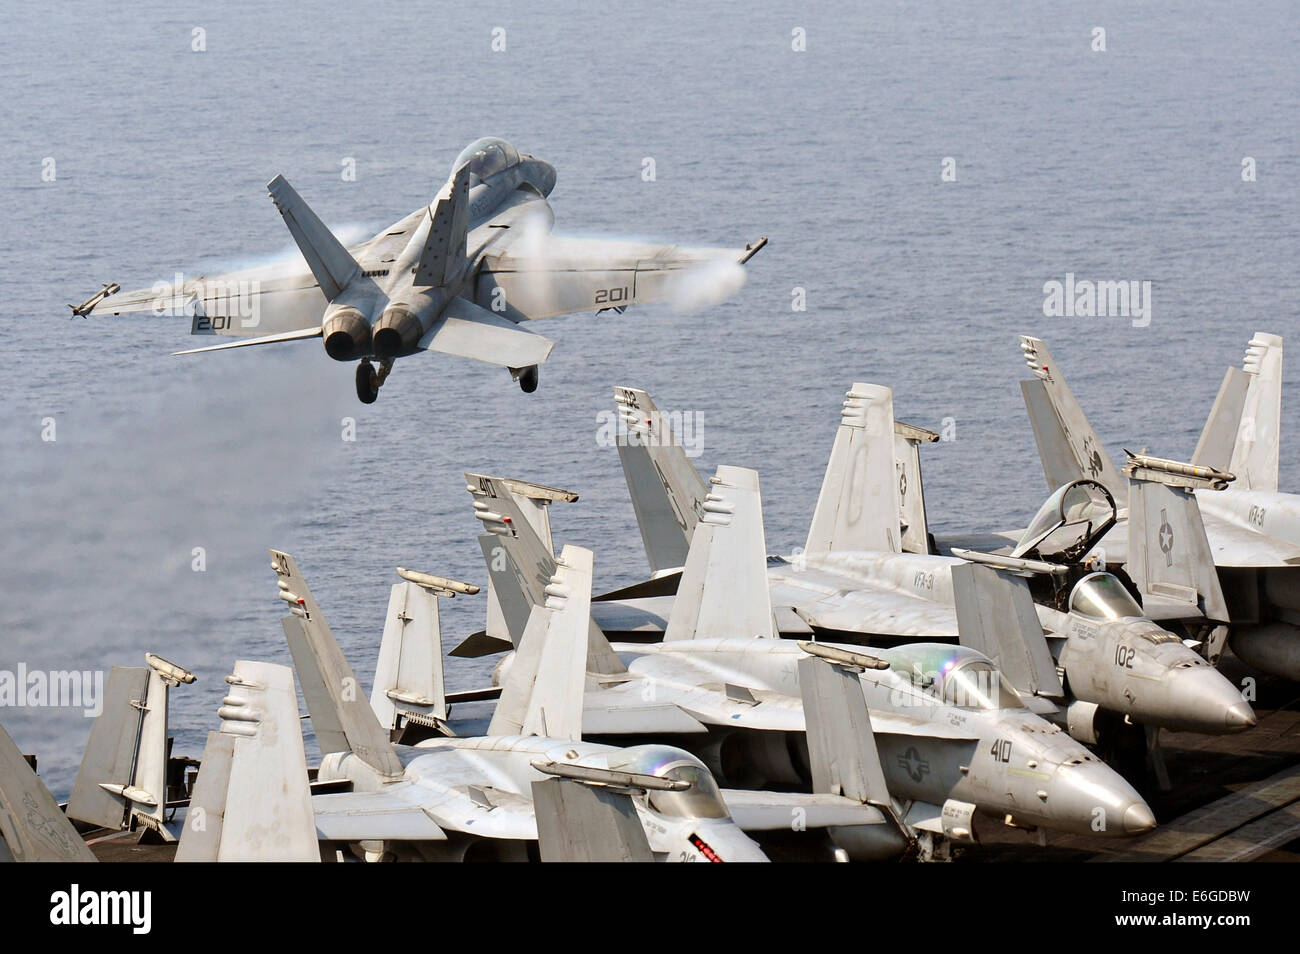 A US Navy F/A-18F Super Hornet fighter aircraft takes off from the flight deck of the aircraft carrier USS George H.W. Bush on a mission to support the Iraqi military August 16, 2014. President Obama authorized targeted airstrikes to protect U.S. personnel from extremists known as the Islamic State in Iraq and the Levant. Stock Photo